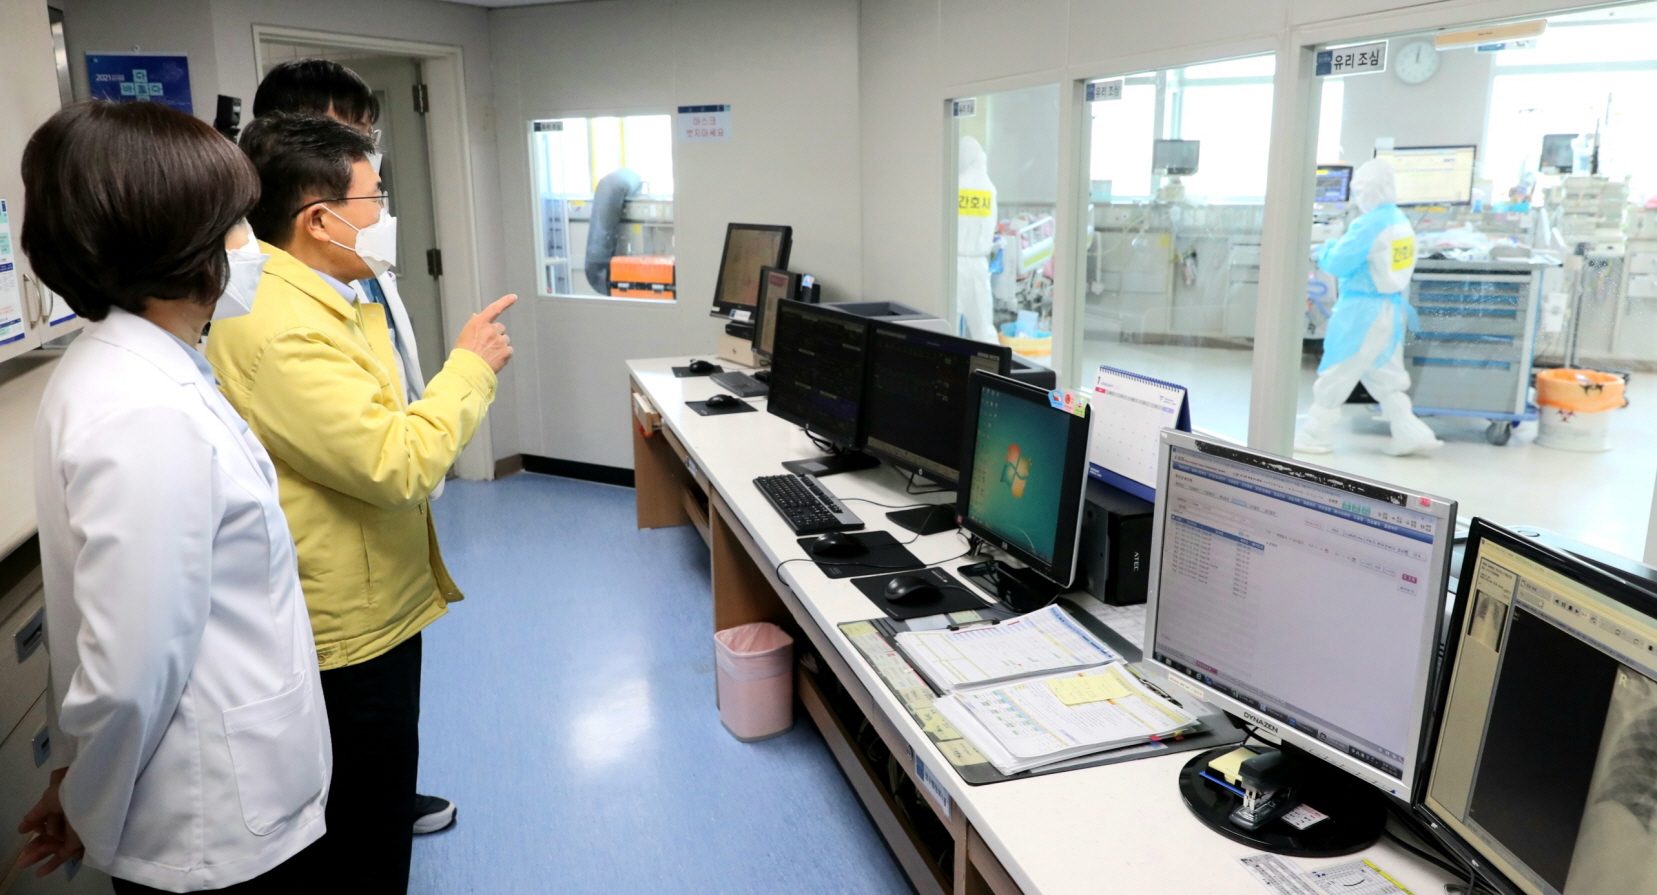 Minister Kwon Checks Hospital Networks in North Gyeonggi for COVID-19 Treatment (January 3) 사진10